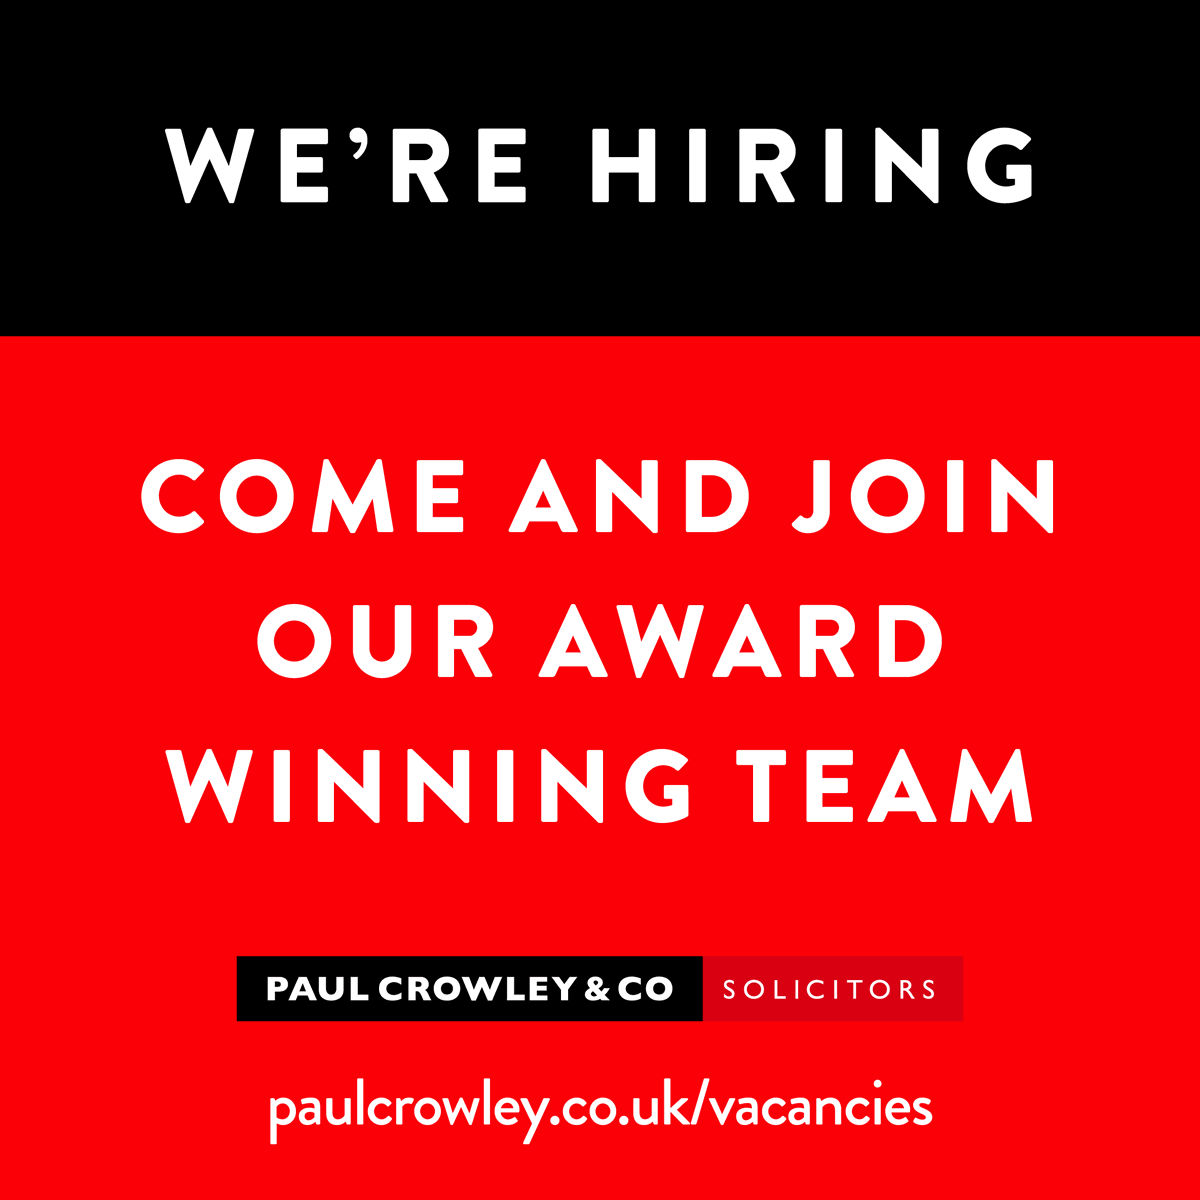 👩🏼‍💻 Paul Crowley & Co solicitors are hiring!
Please visit: paulcrowley.co.uk/vacancies/
#paulcrowleyandco #paulcrowleysolicitors #legaljobs #paulcrowleyandcosolicitors #legalrecruitment #liverpoolsolicitorjobs #liverpoolsolicitors #wearehiring